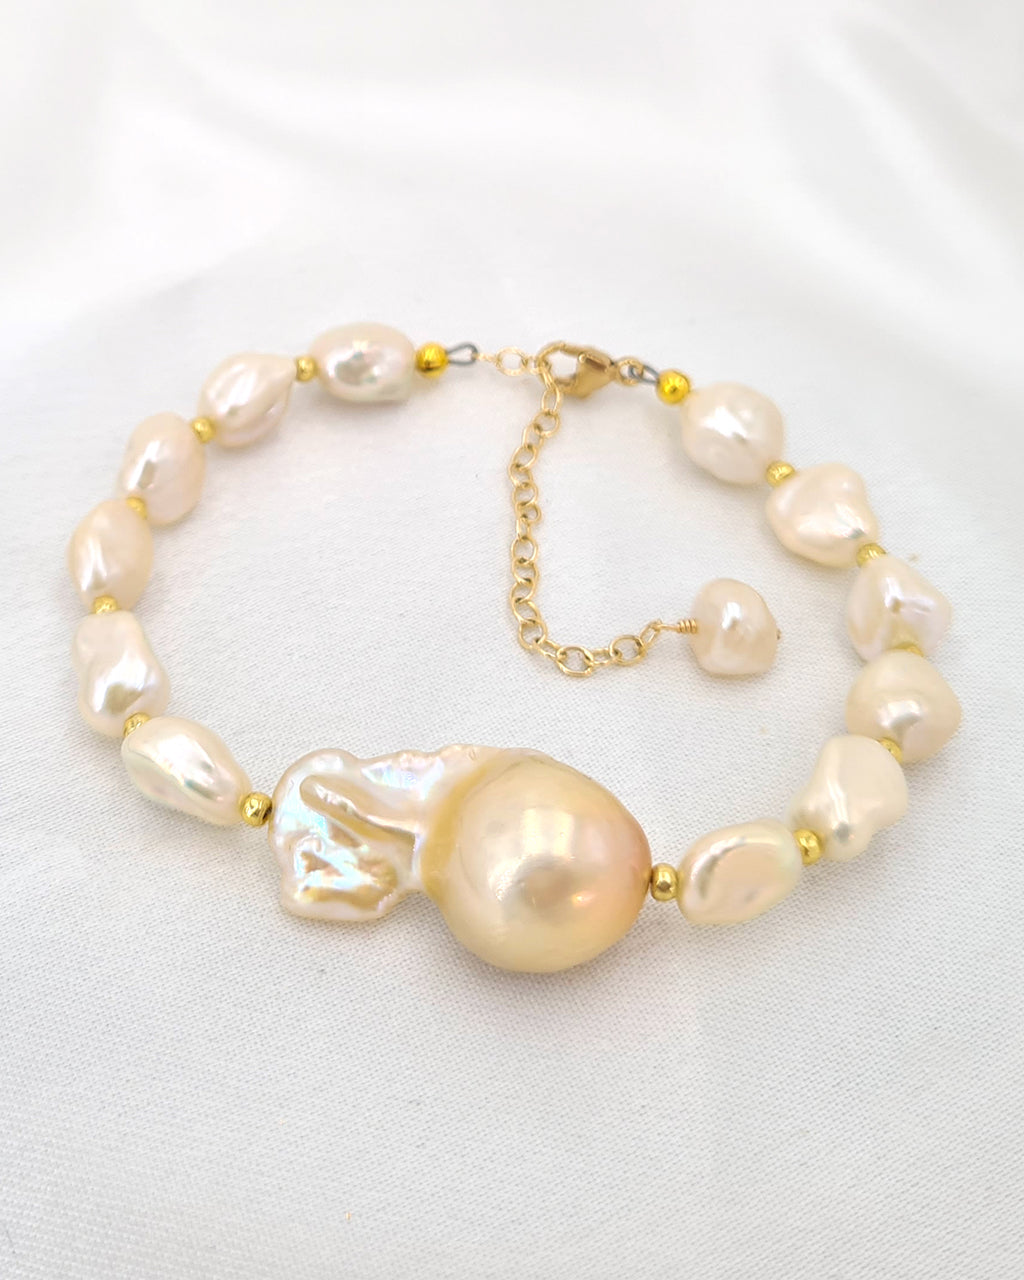 Baroque Pearl with White Keshi pearls gold bracelet, Statement Modern Pearl Jewelry, Wedding pearl for brides